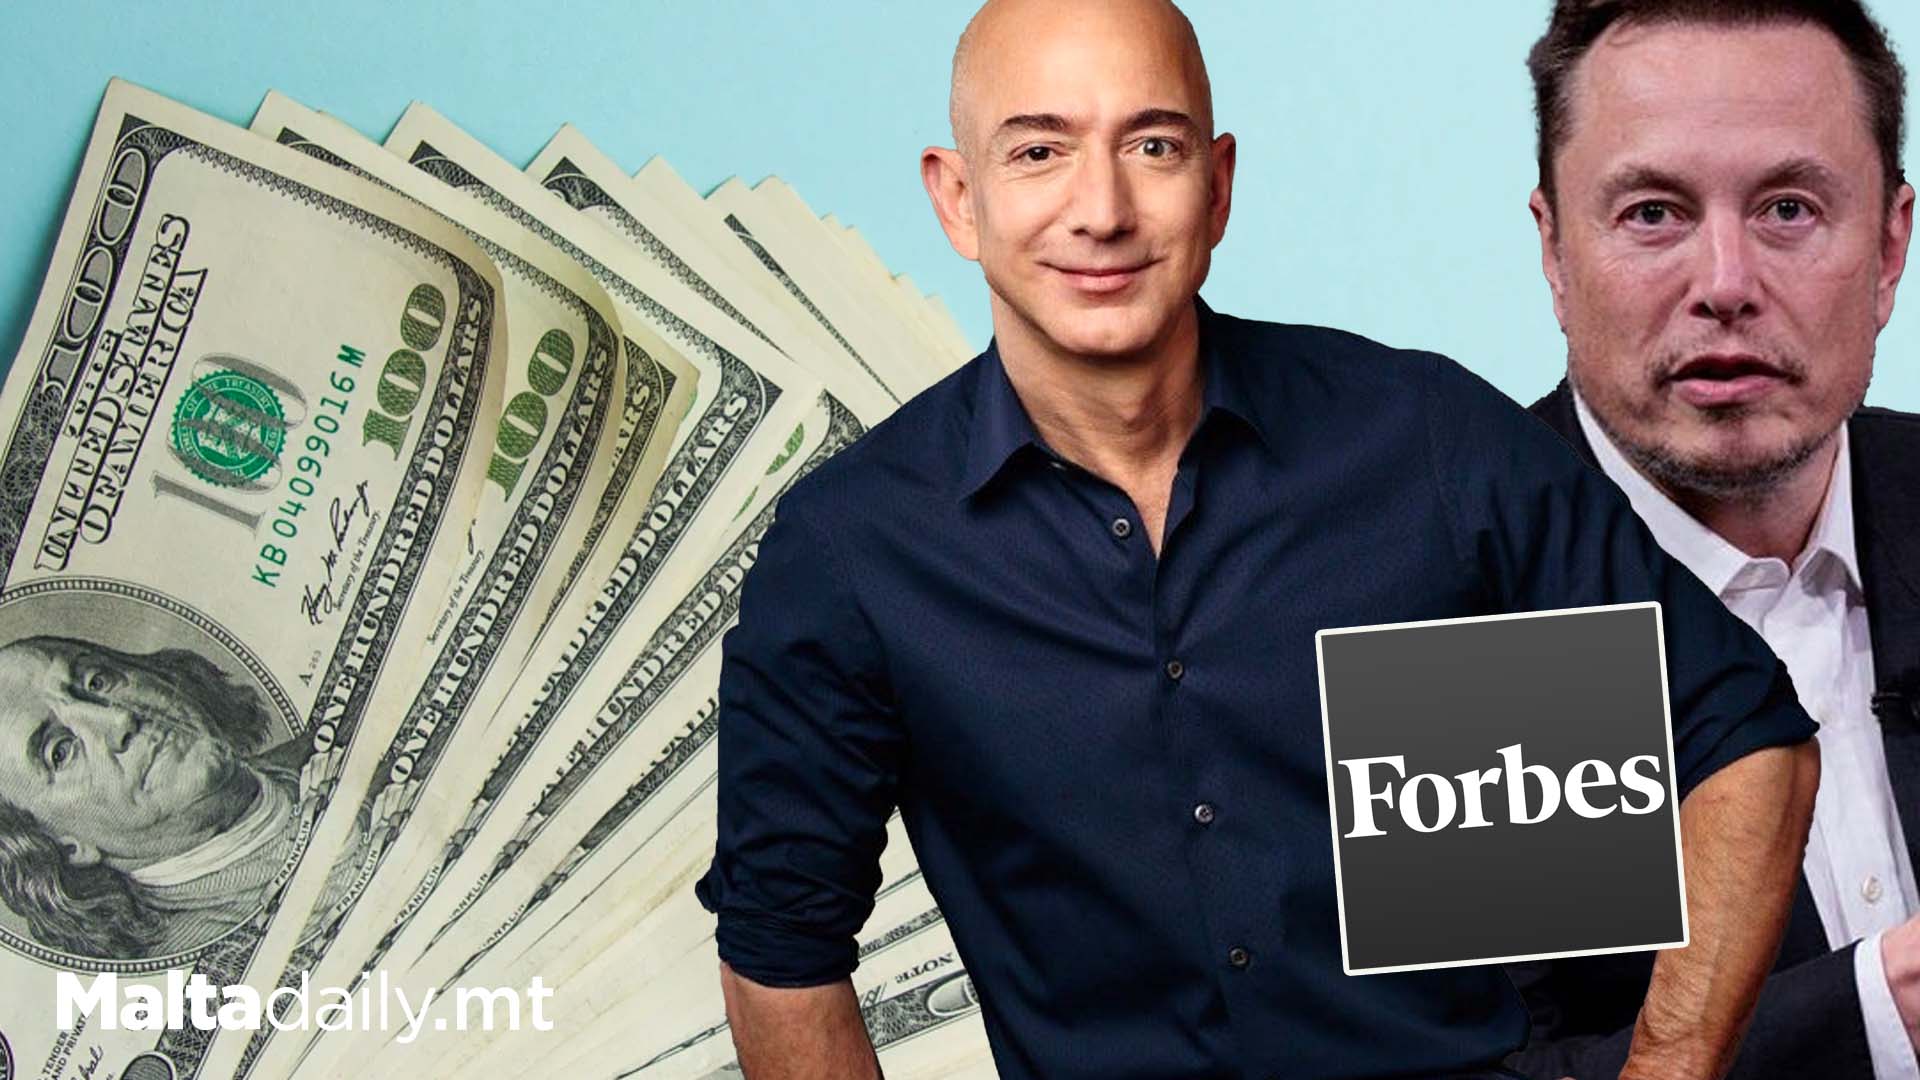 10 Richest Persons According To Forbes Real Time Billionaires